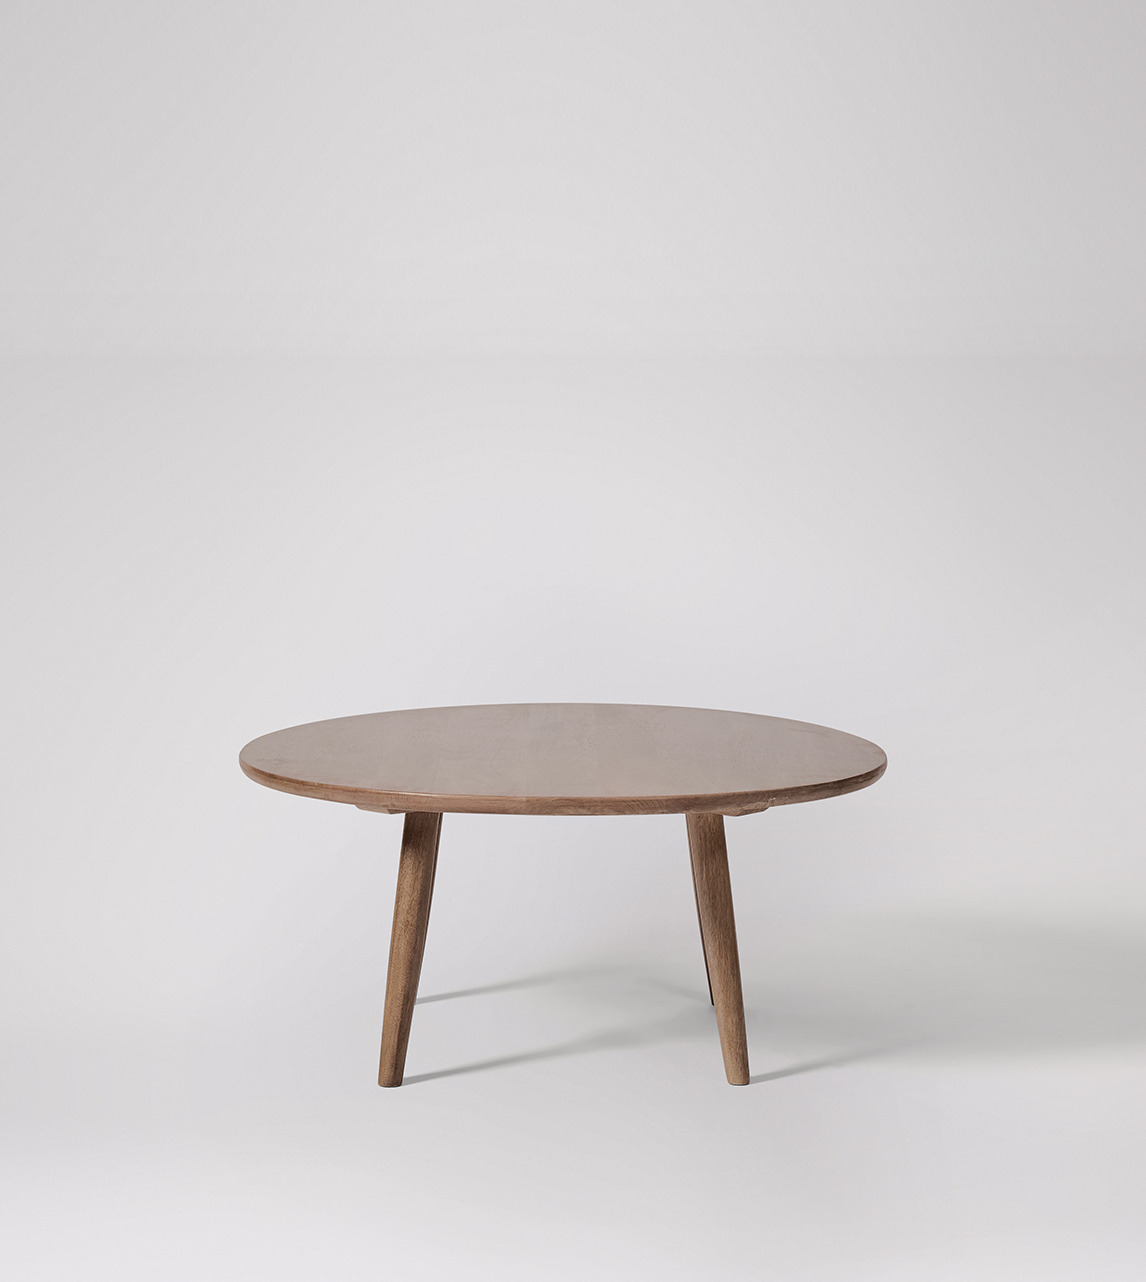 Southwark Contemporary Style Coffee Table in Natural Oak-Stained Mango ...